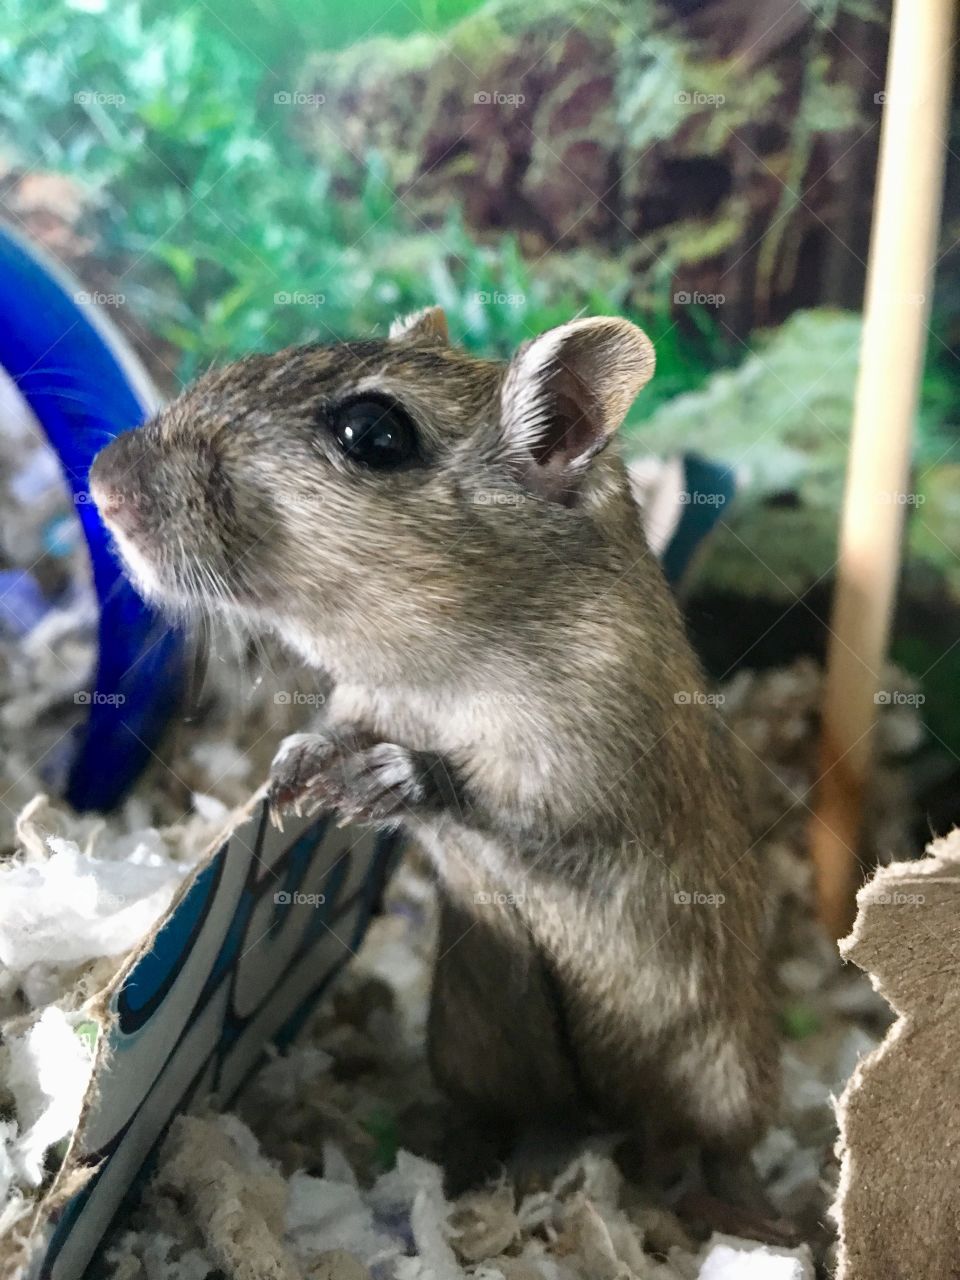 A male gerbil exploring his cage. Not pictured is his bonded brother. Very strange coloration for a gerbil, would describe it as calico. He has quite long claws for scratching and digging.